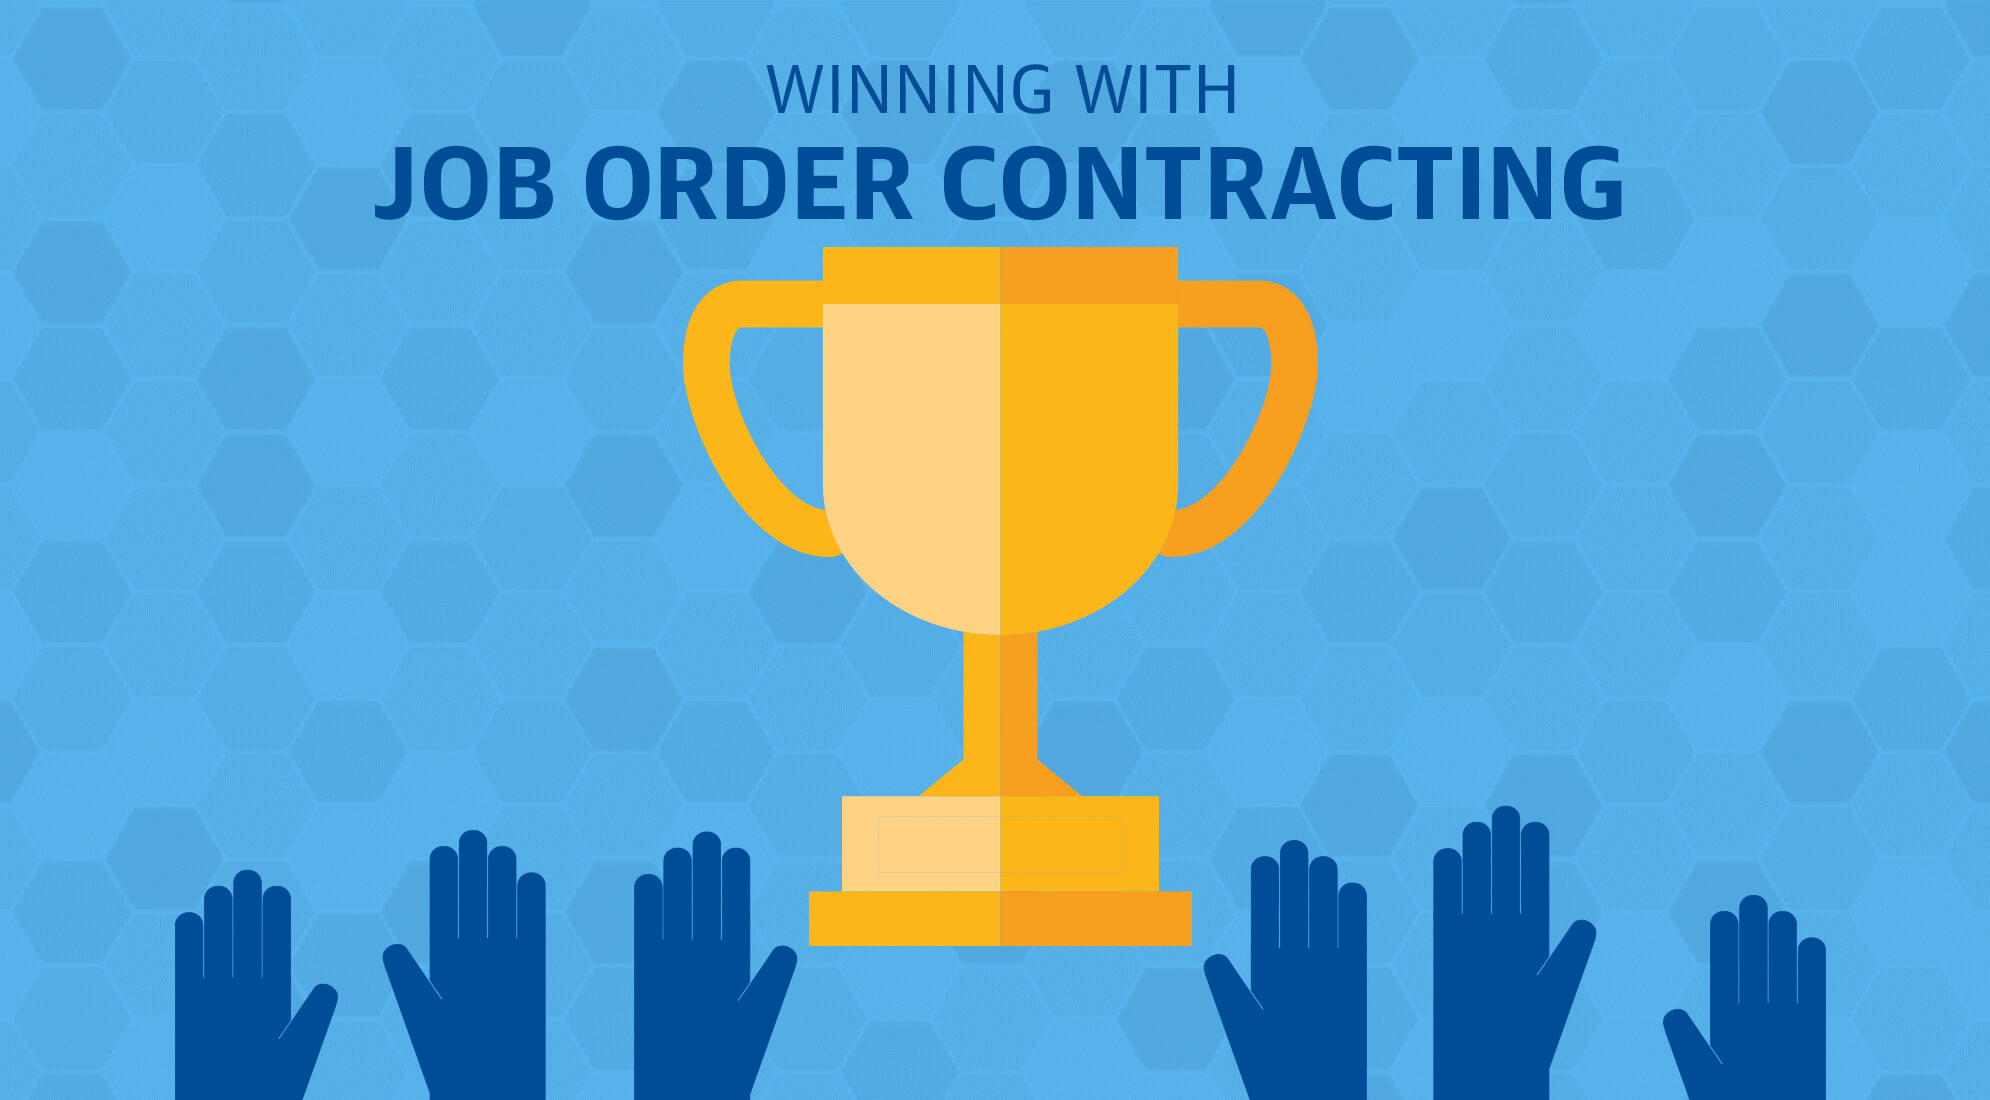 Challenge Accepted: How to Win With Job Order Contracting